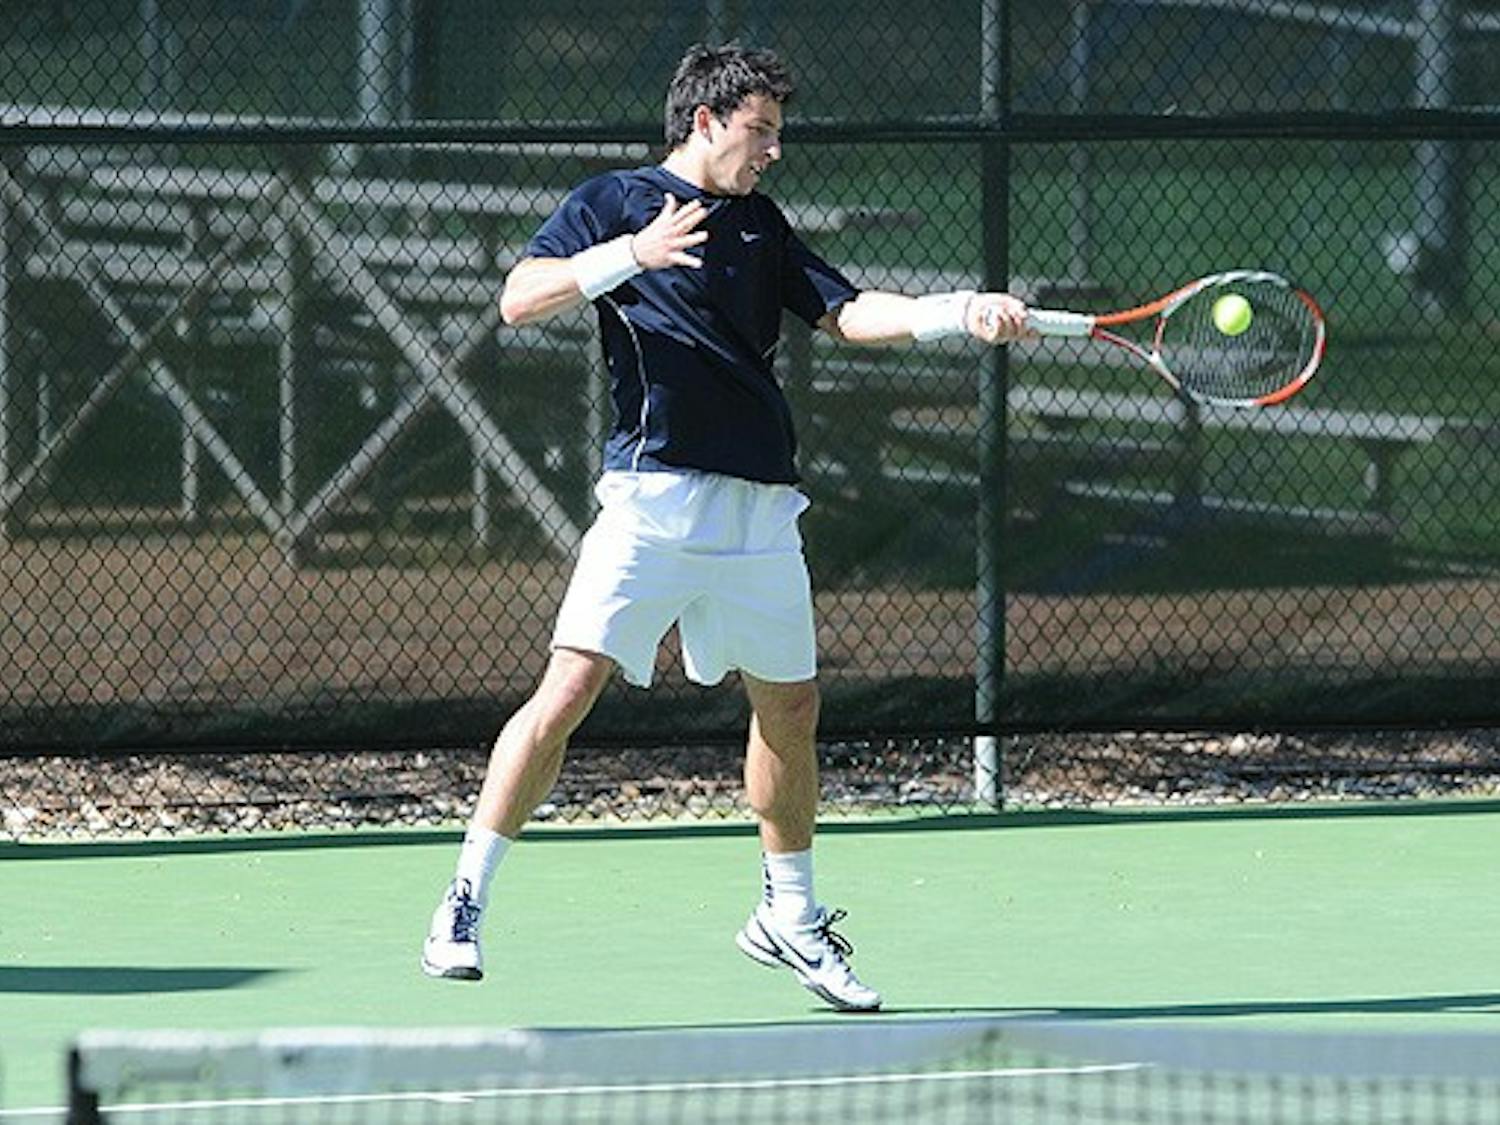 Henrique Cunha was topped by the Tar Heels’ Jose Hernandez in the final match,  7-5, 2-6, 6-4.